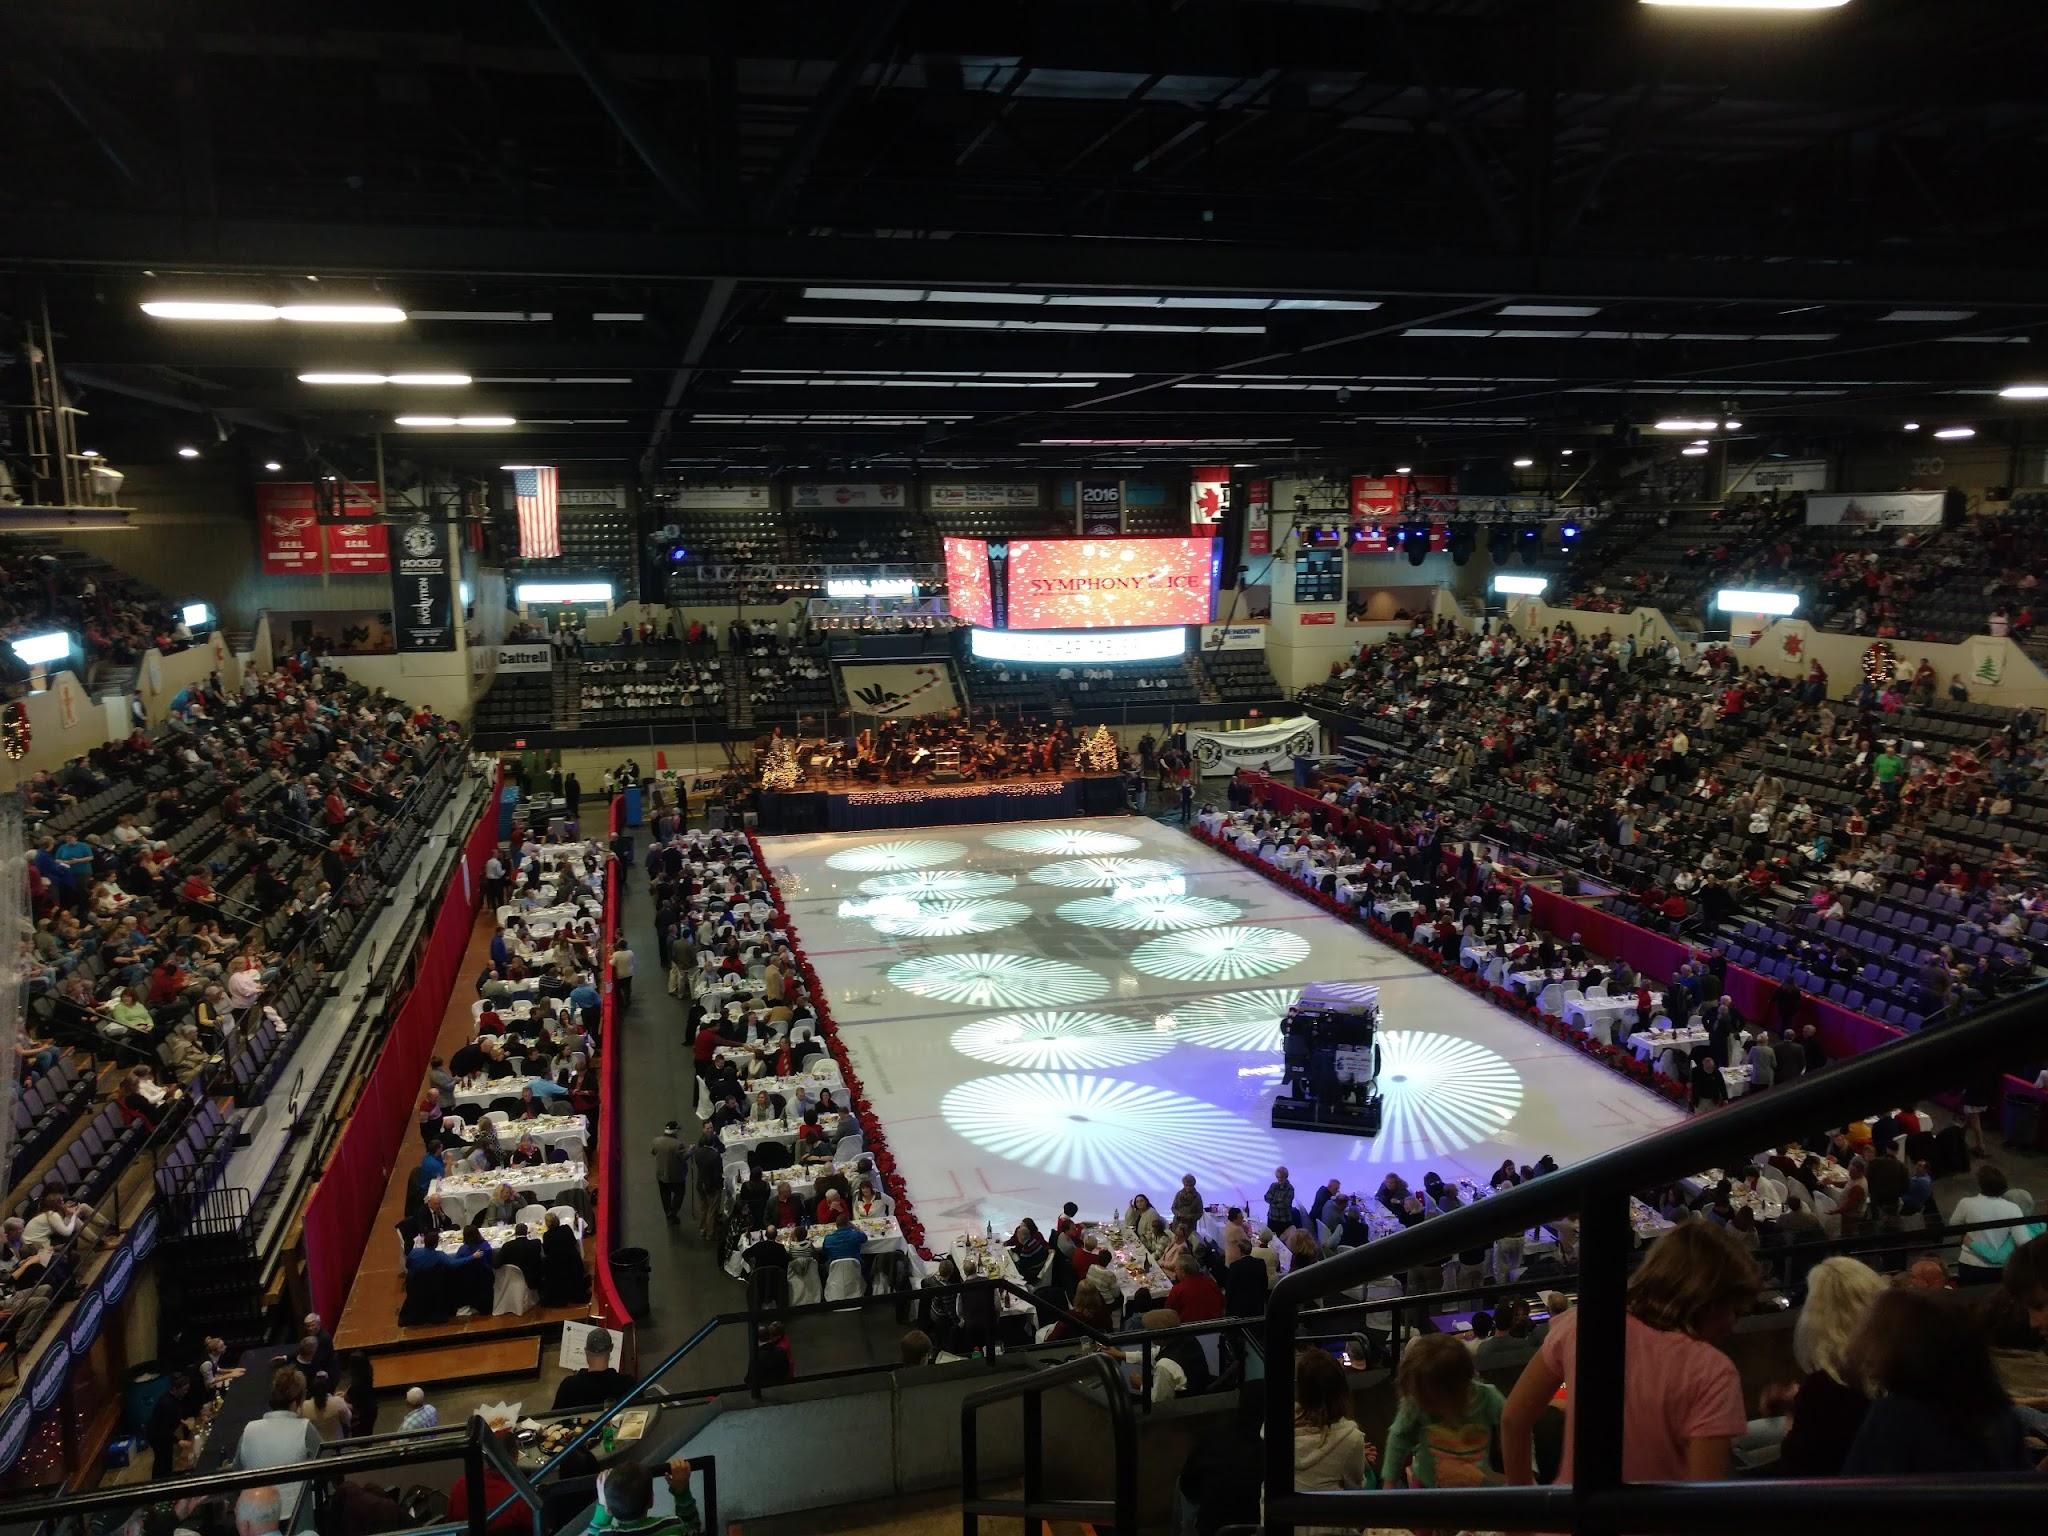 Events at WesBanco Arena